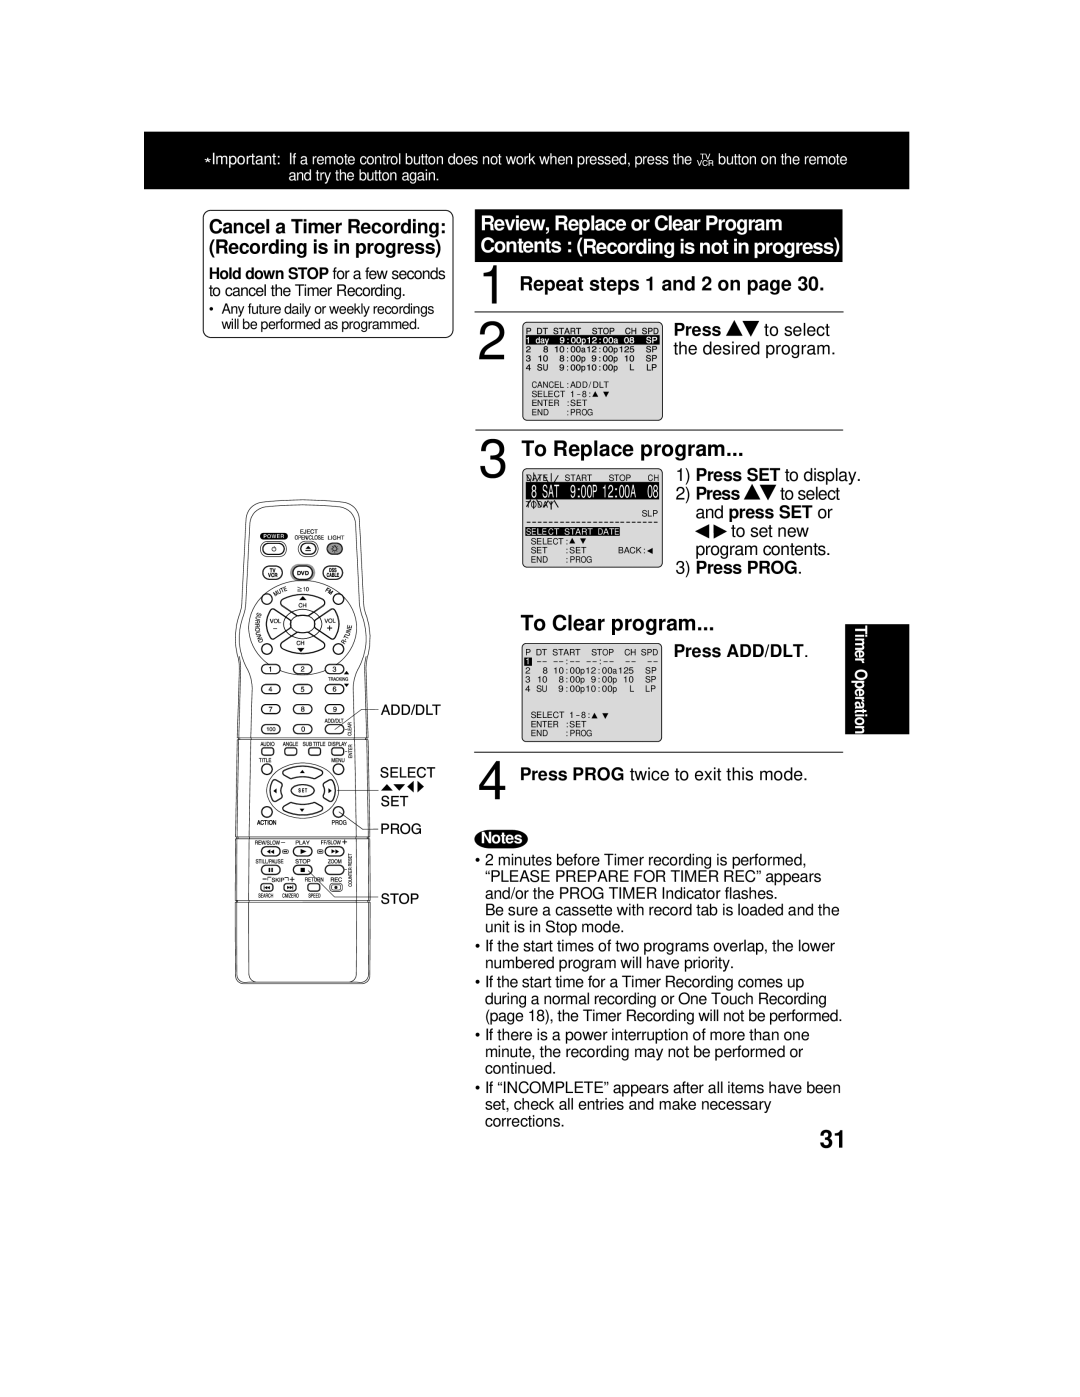 Panasonic AG 527DVDE manual To Replace program, To Clear program, Repeat steps 1 and 2 on page, the desired program, Press 